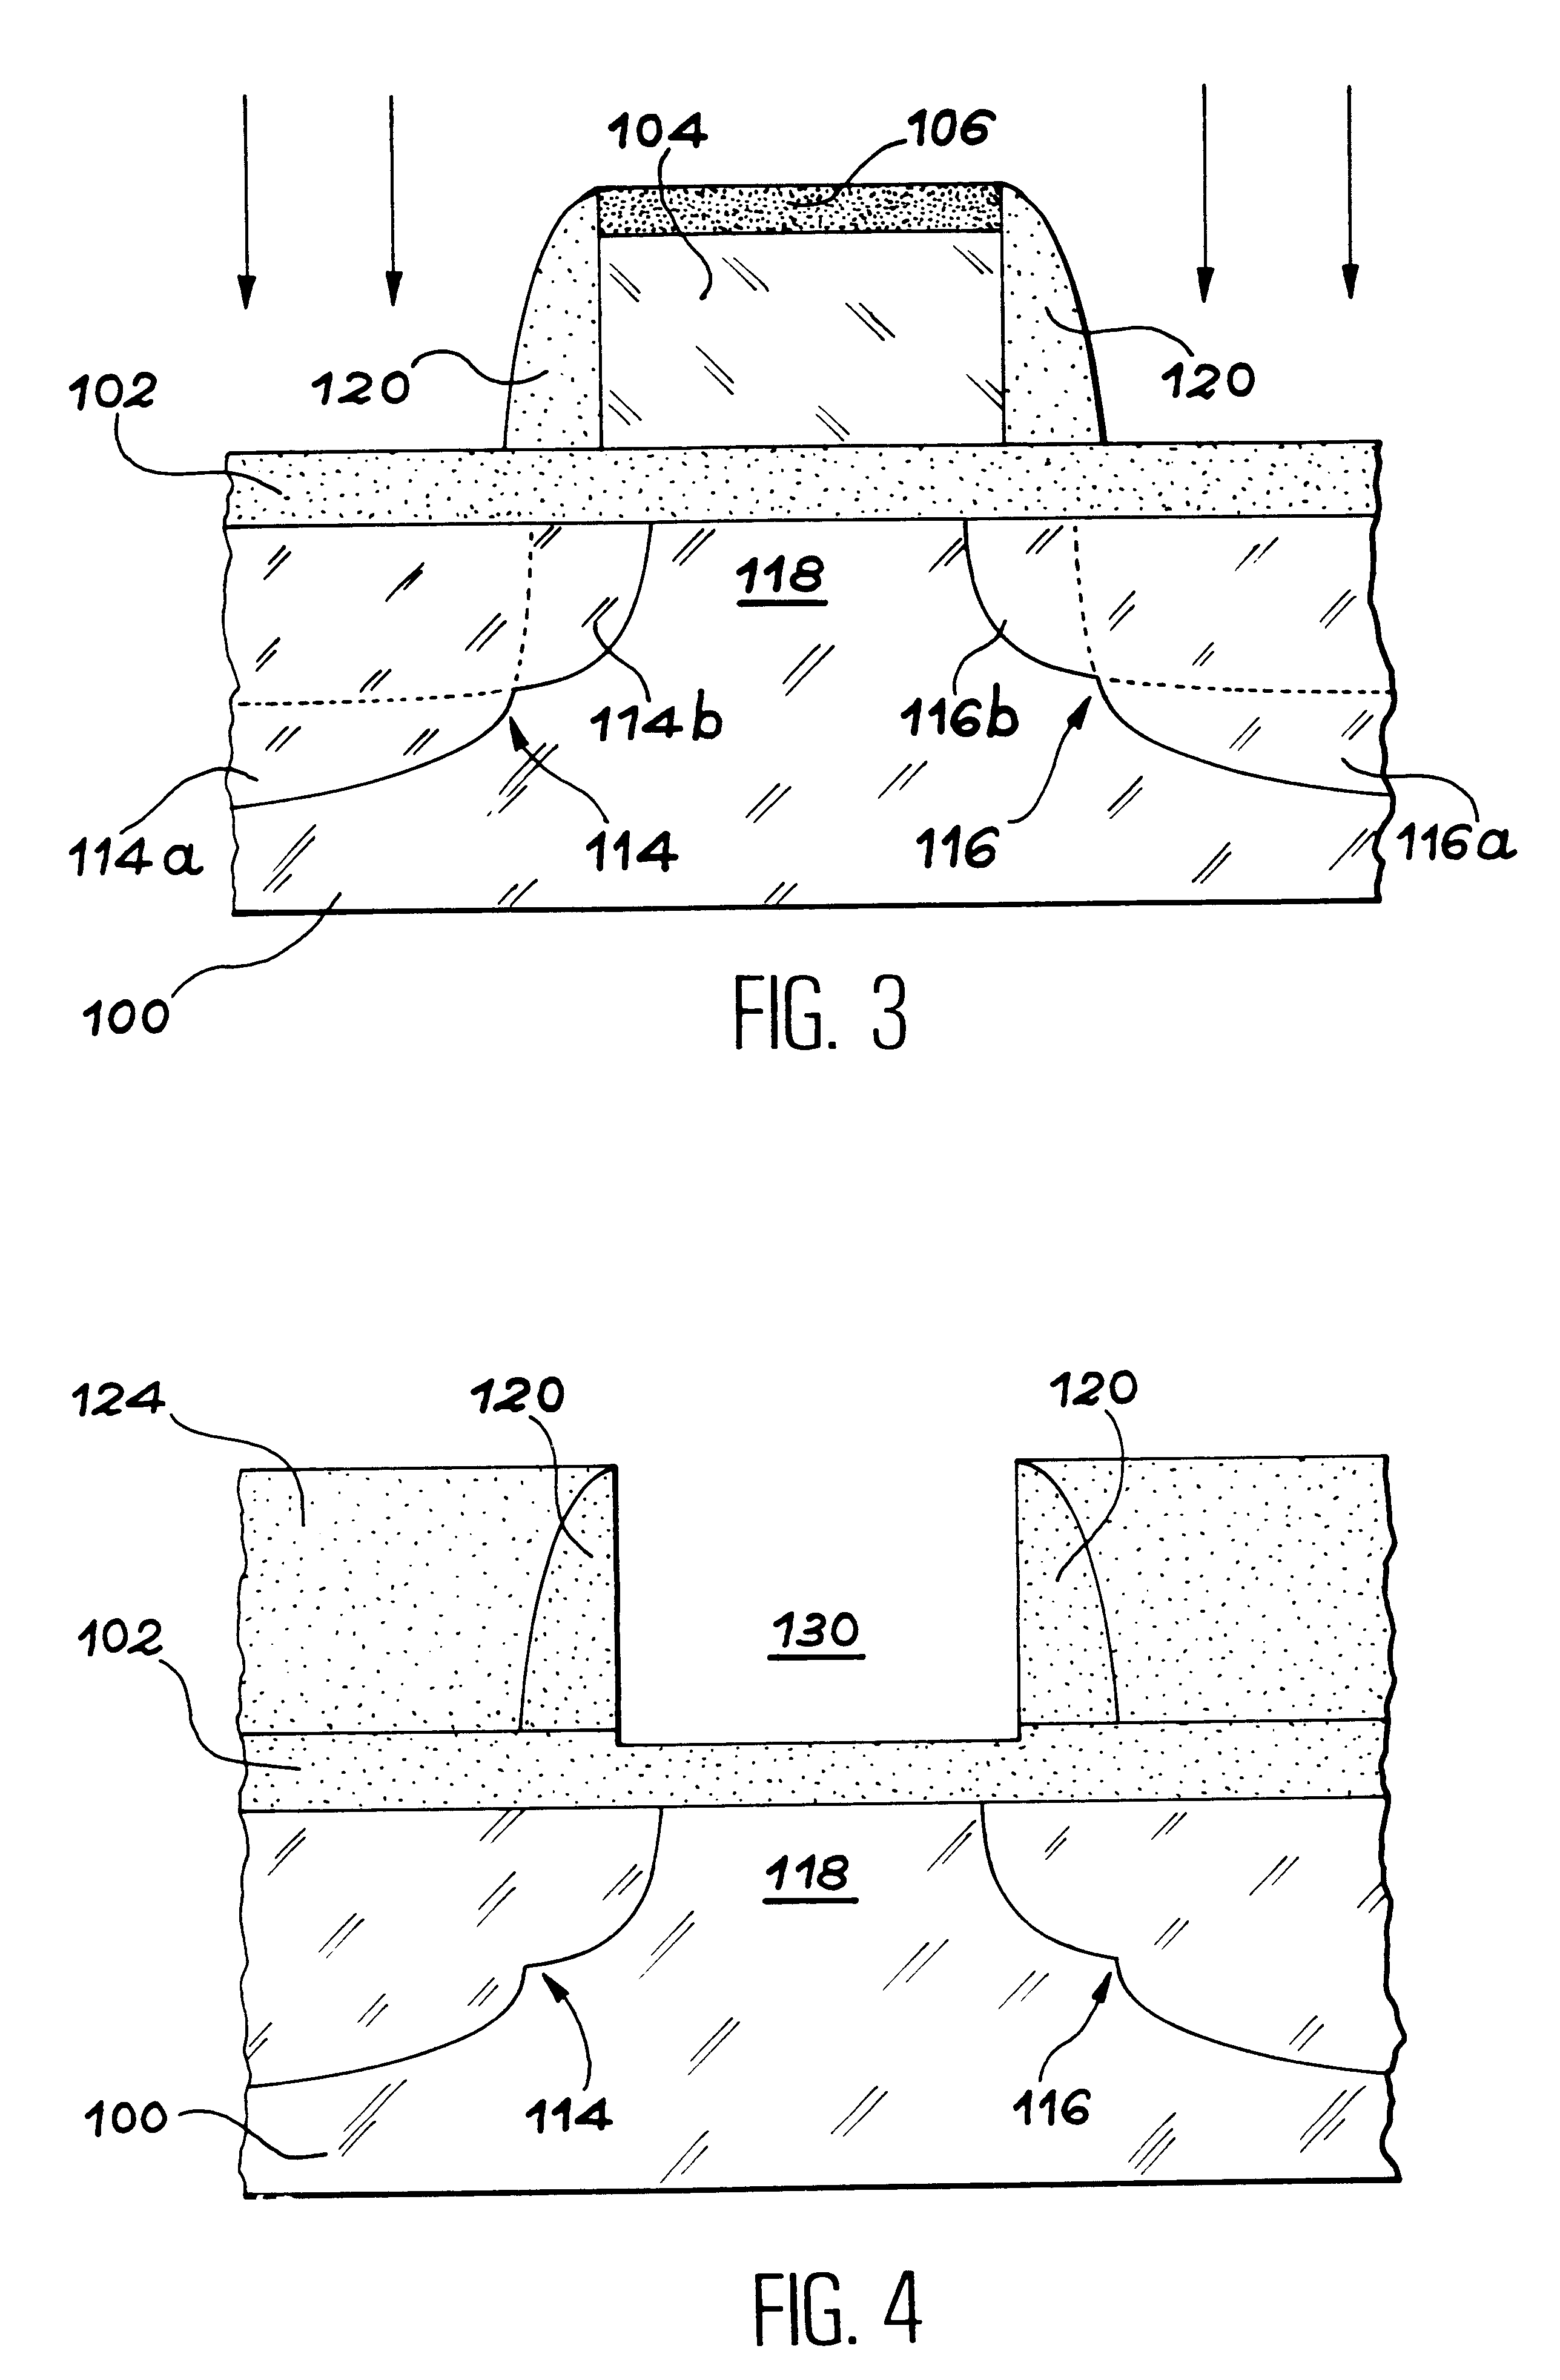 MIS transistor and method for making same on a semiconductor substrate